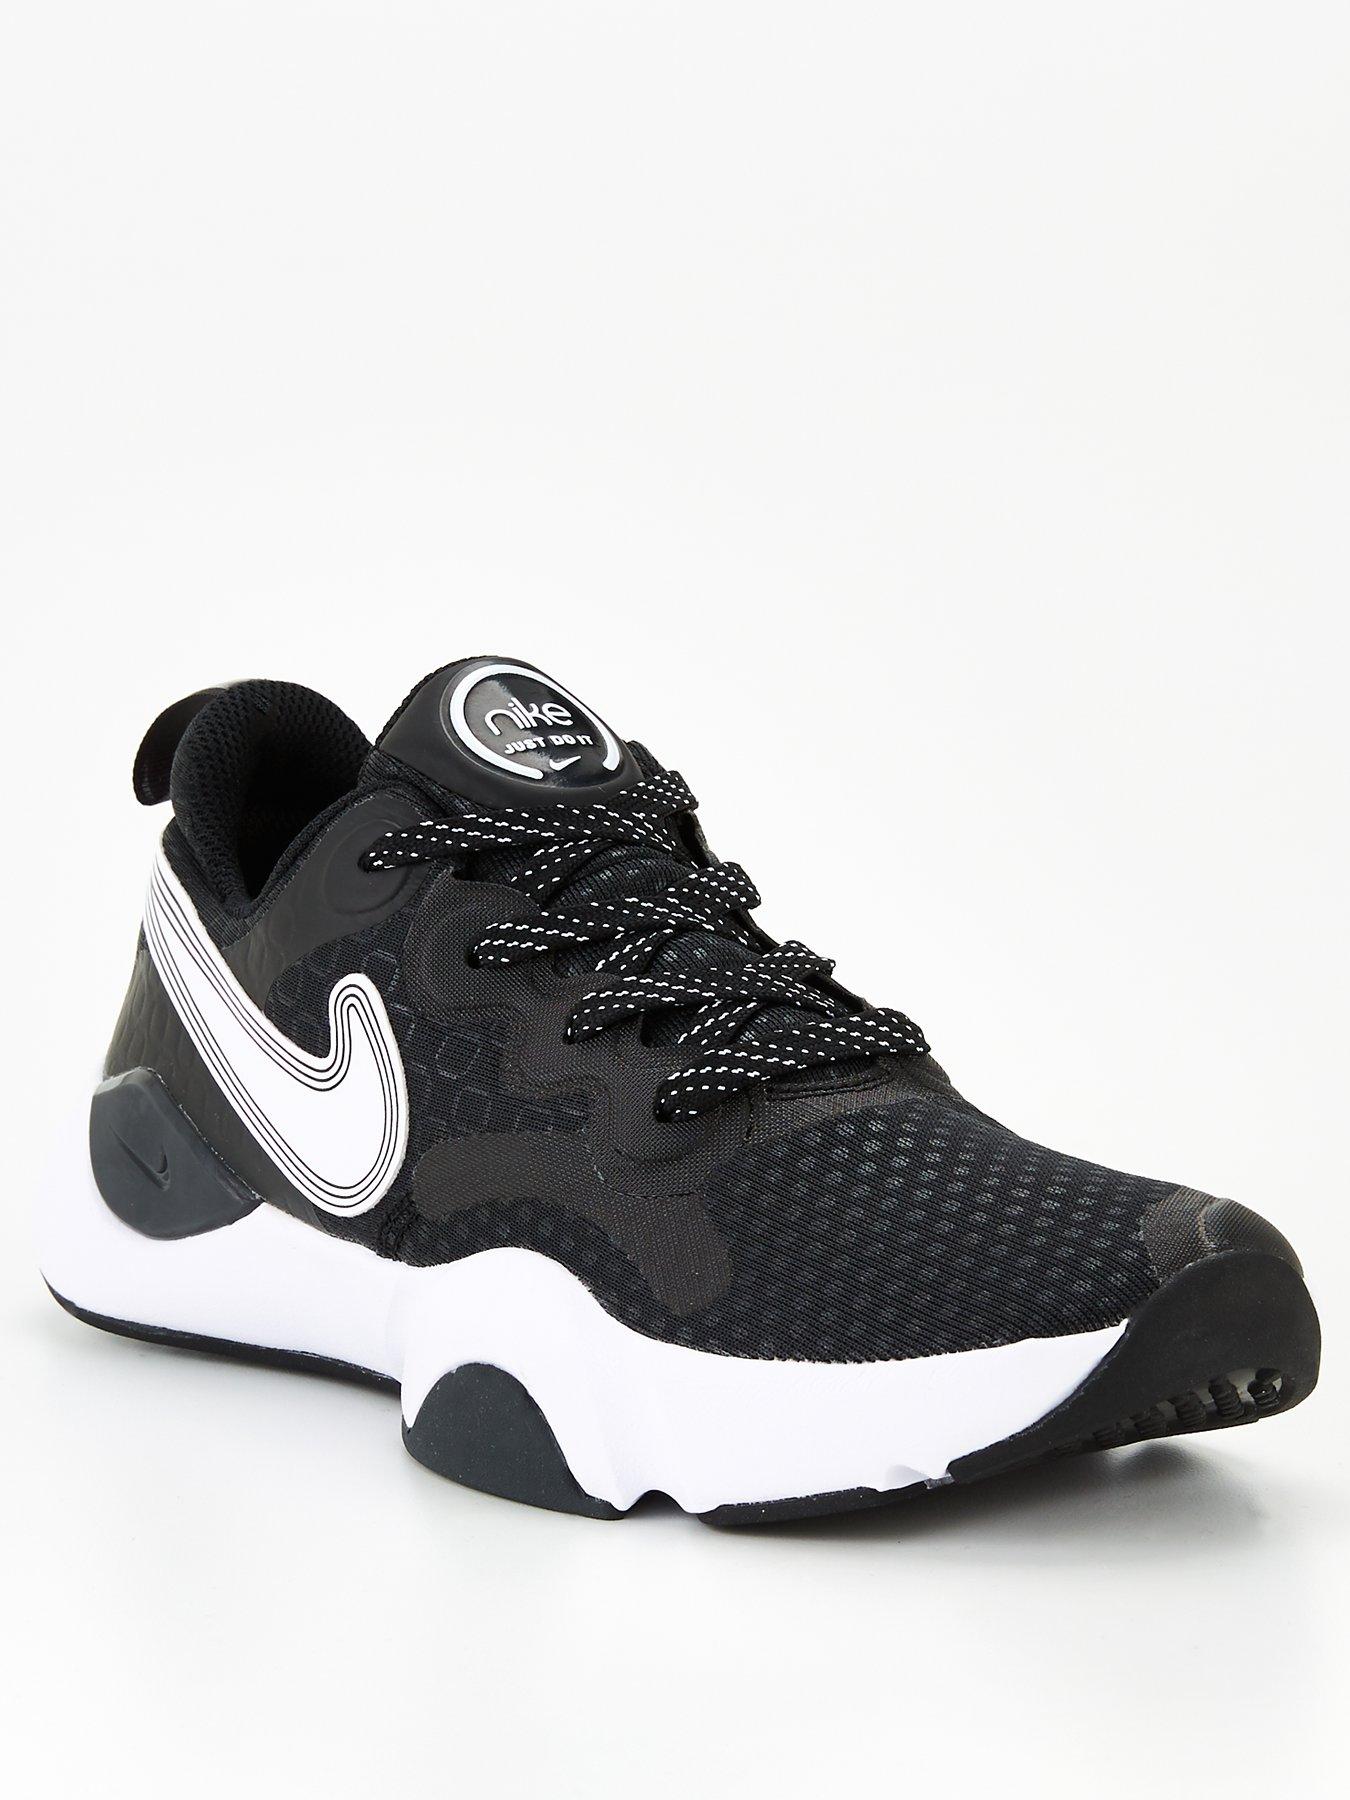 black and white nike trainers ladies